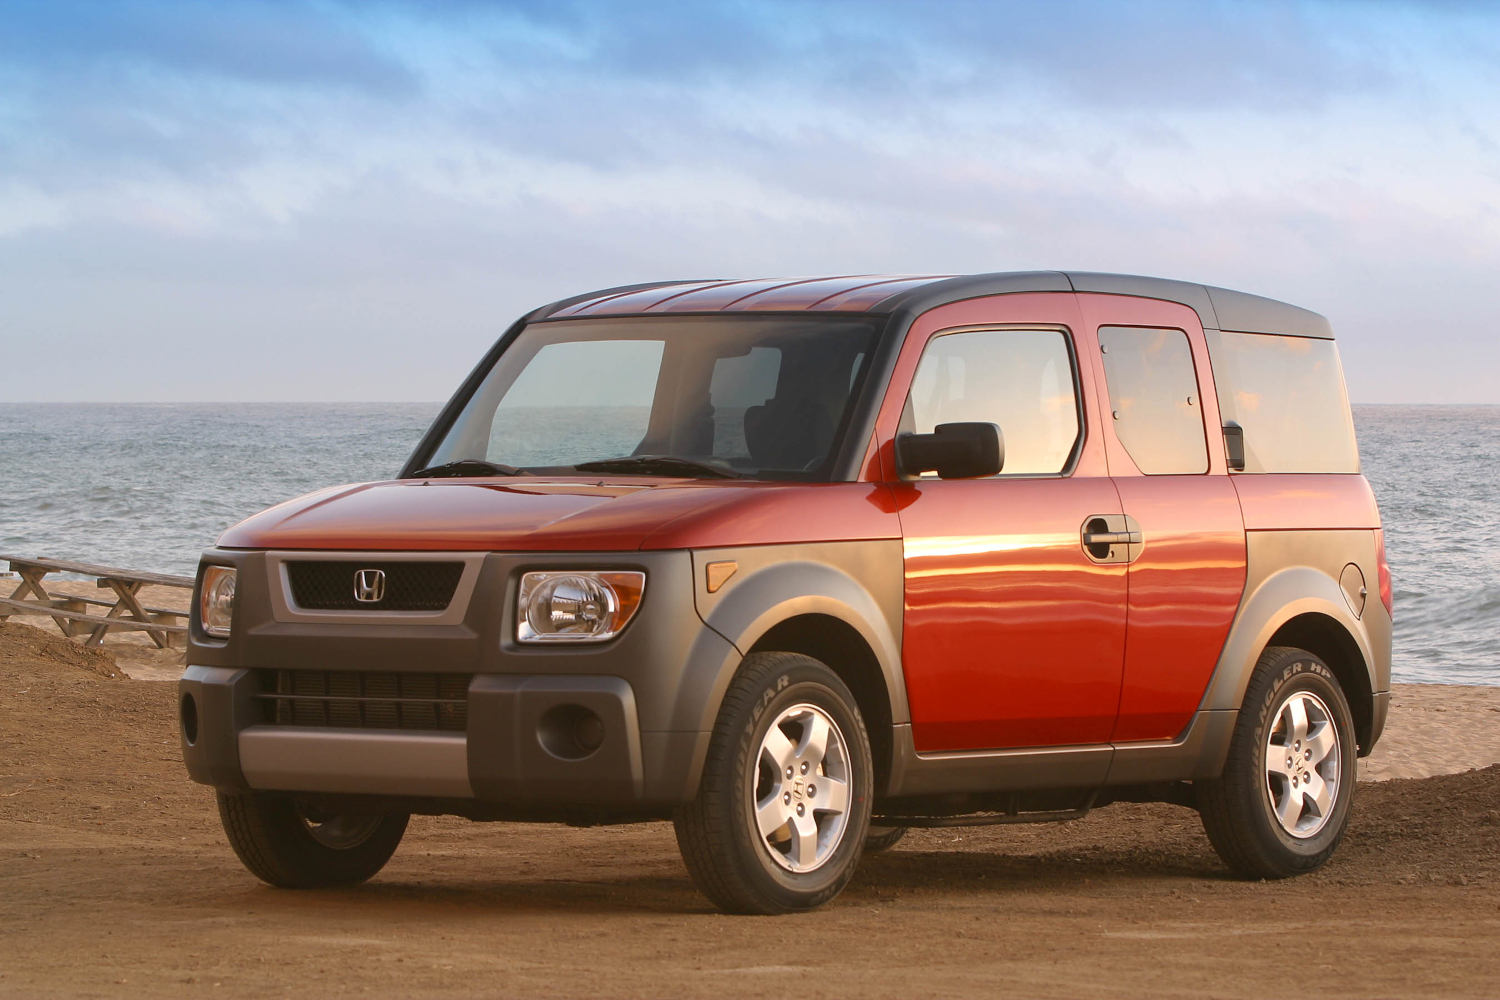 This Honda Element SUV can hit 250,000 miles